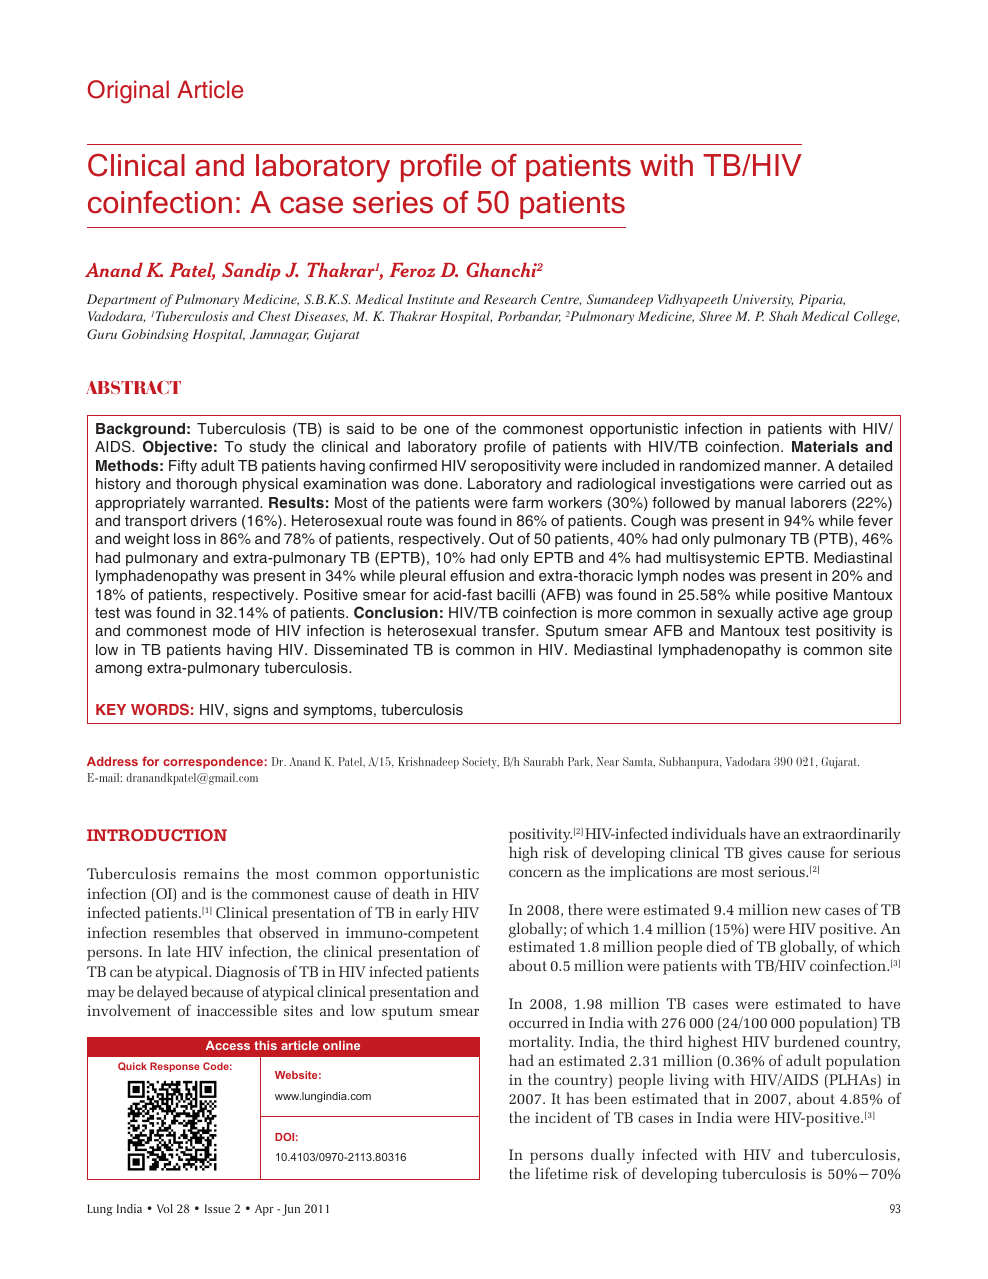 Clinical And Laboratory Profile Of Patients With Tb Hiv Coinfection A Case Series Of 50 Patients Topic Of Research Paper In Clinical Medicine Download Scholarly Article Pdf And Read For Free On